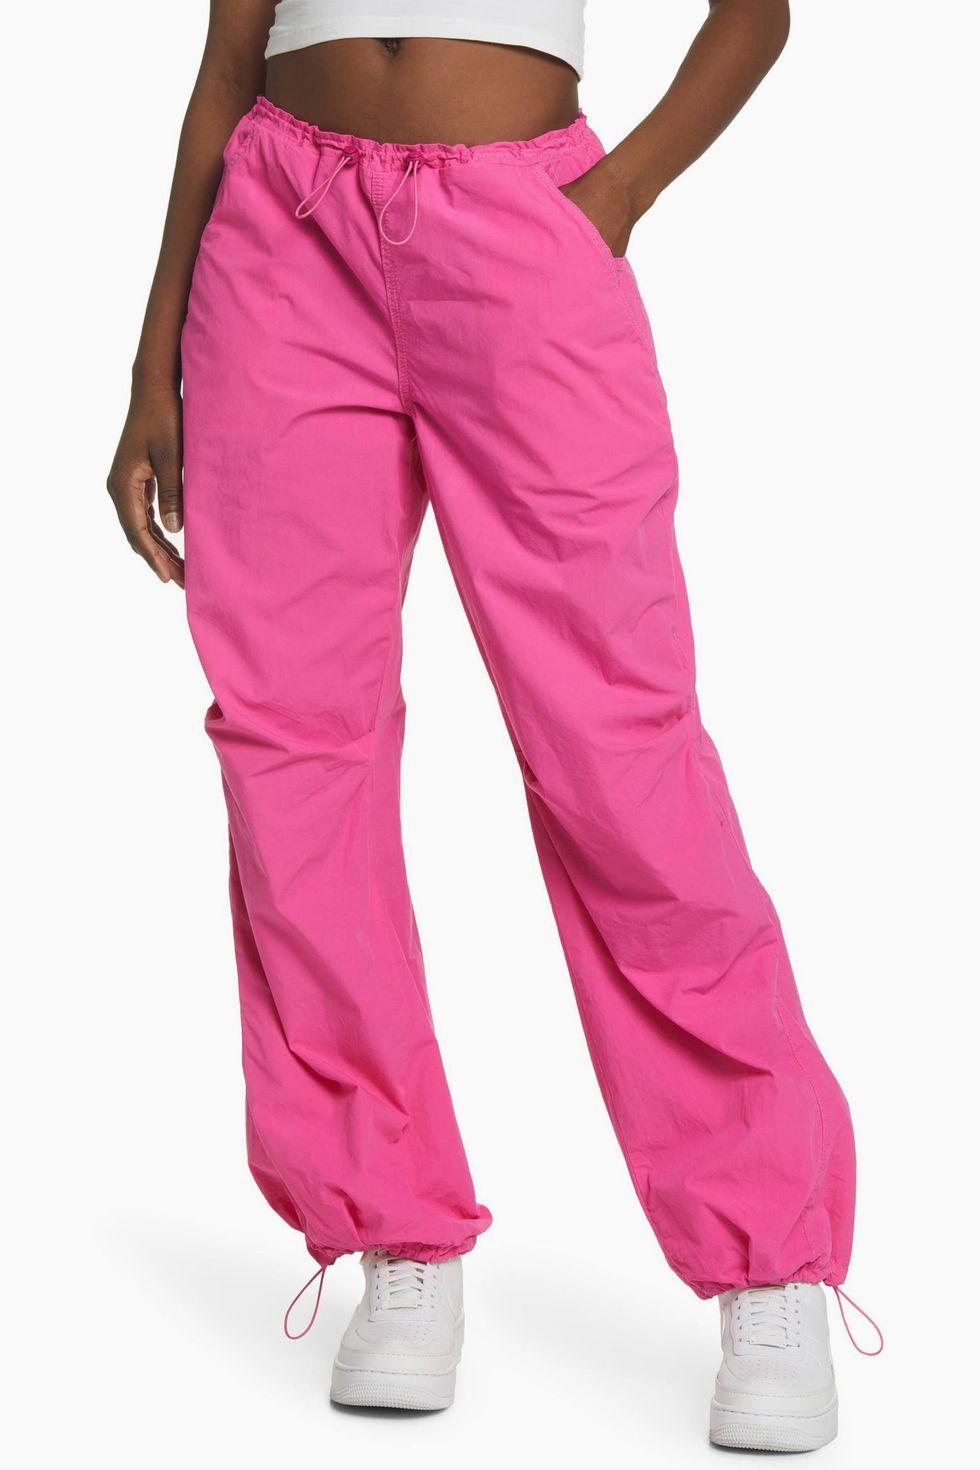 Styling Pink Parachute Pants from Target